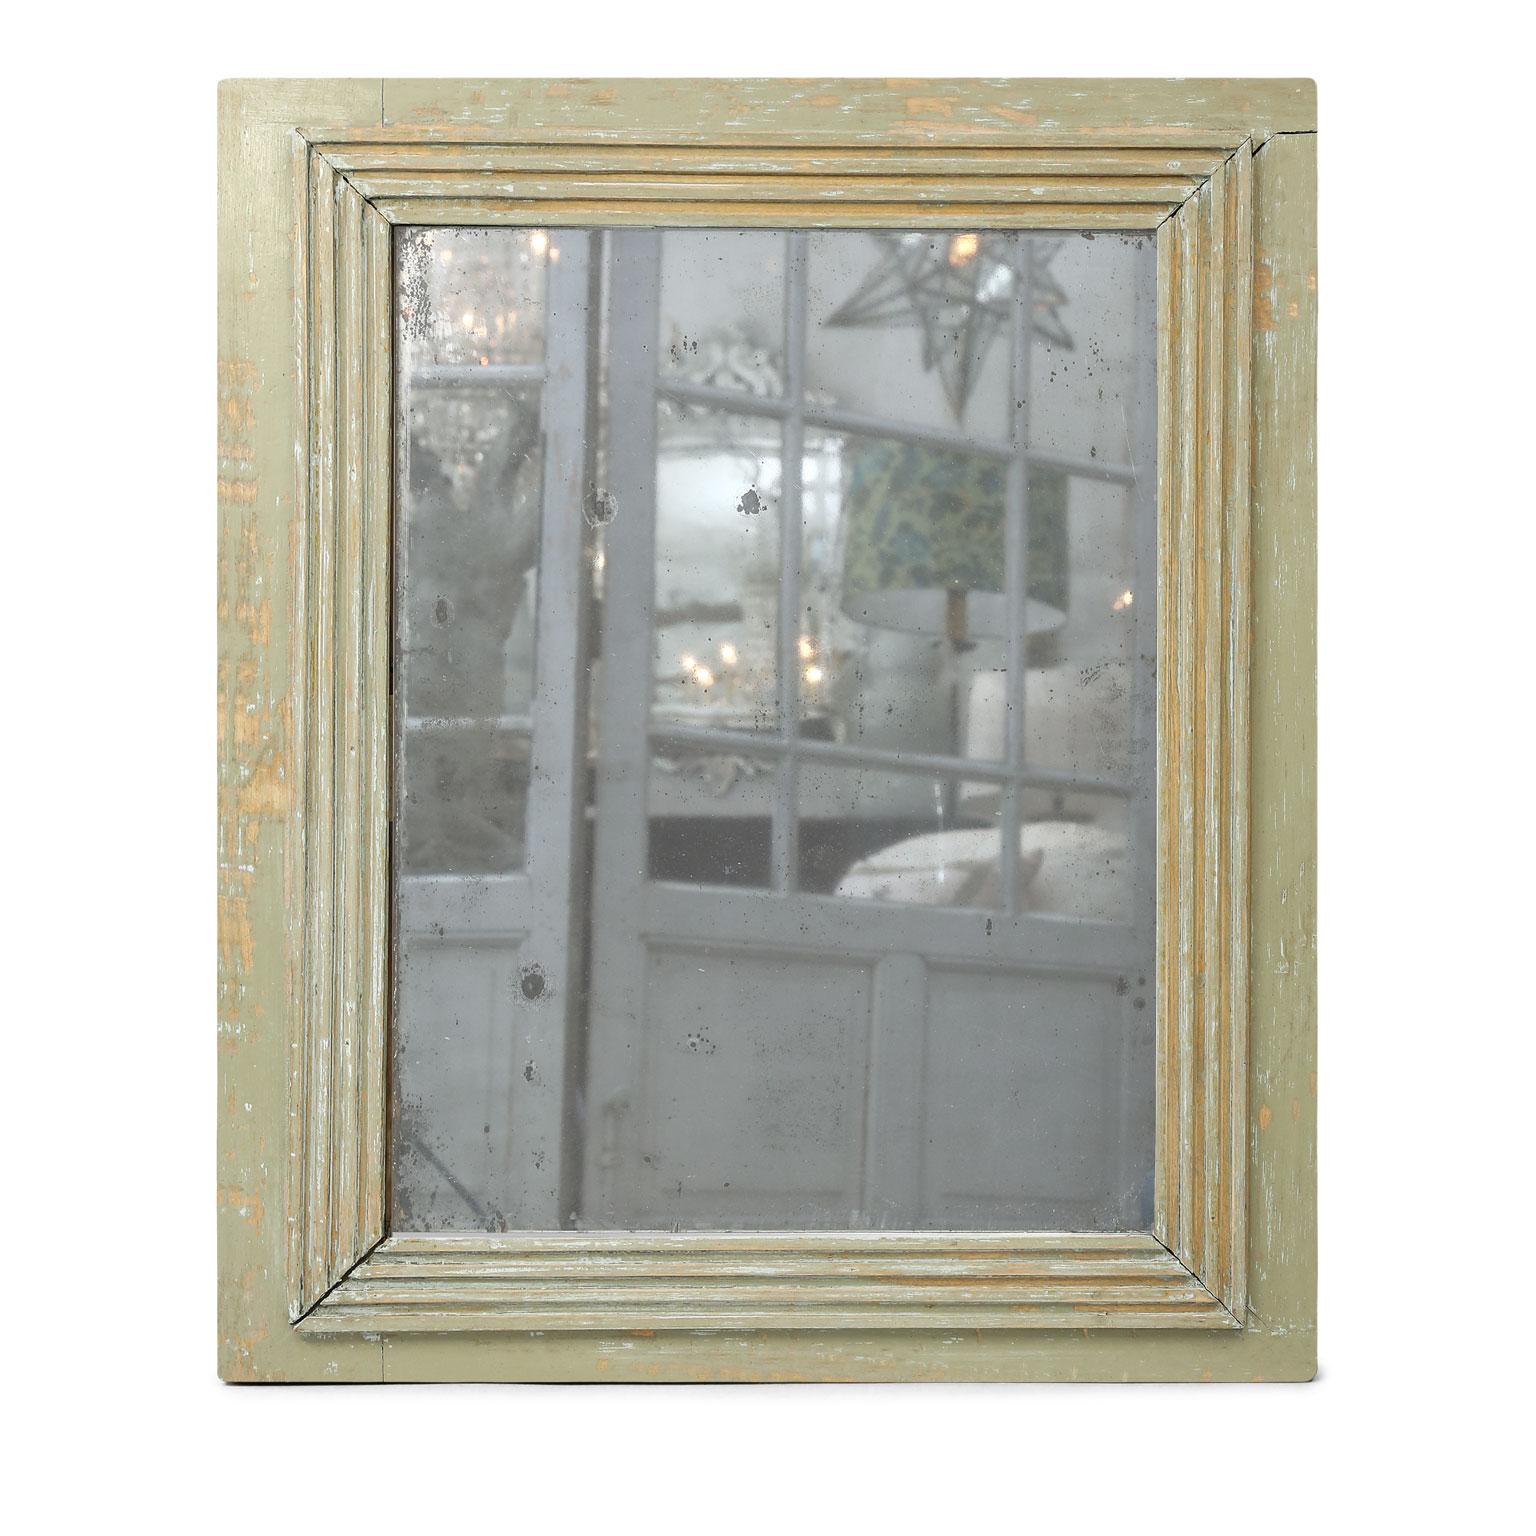 French painted mirror, dating to the early 19th century. Original (or early) mercury glass mirror plate surrounded by a hand carved fluted border. Mirror glass shows expected spots due to wear and age. Along with a gorgeous subtle 'diamond dust'